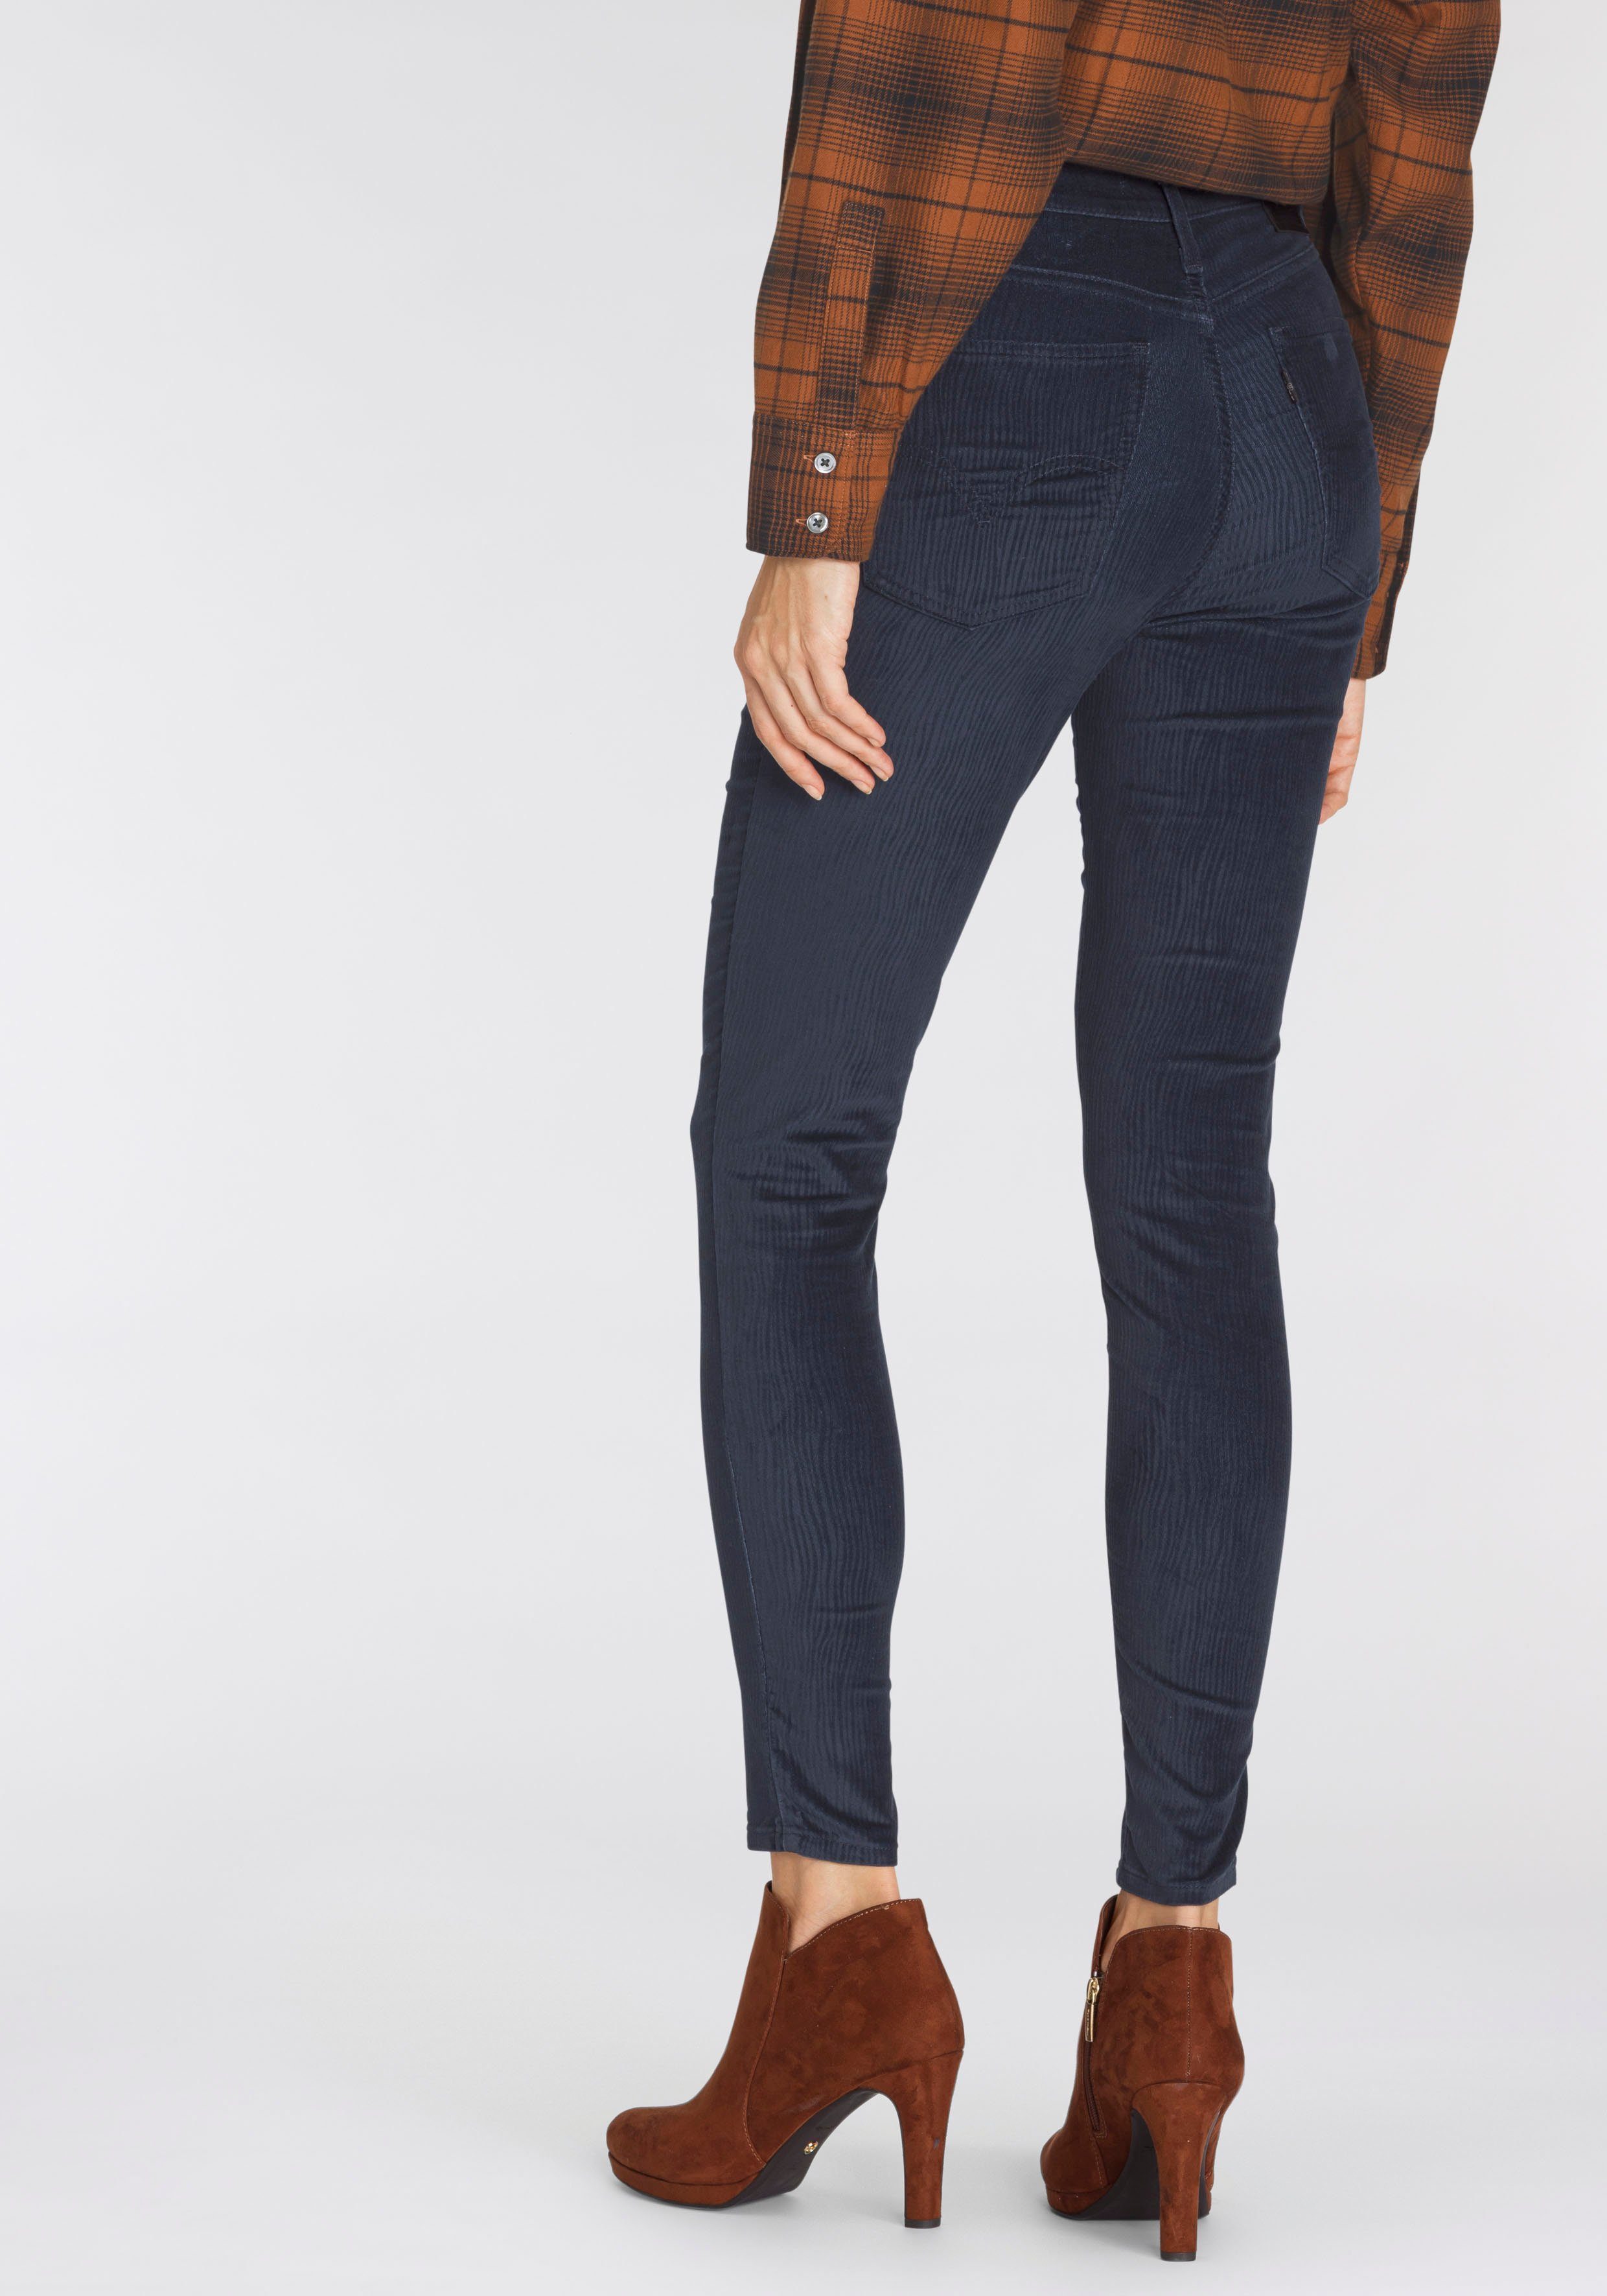 Damen Jeans Levi's® Thermojeans MILE HIGH SUPER SKINNY